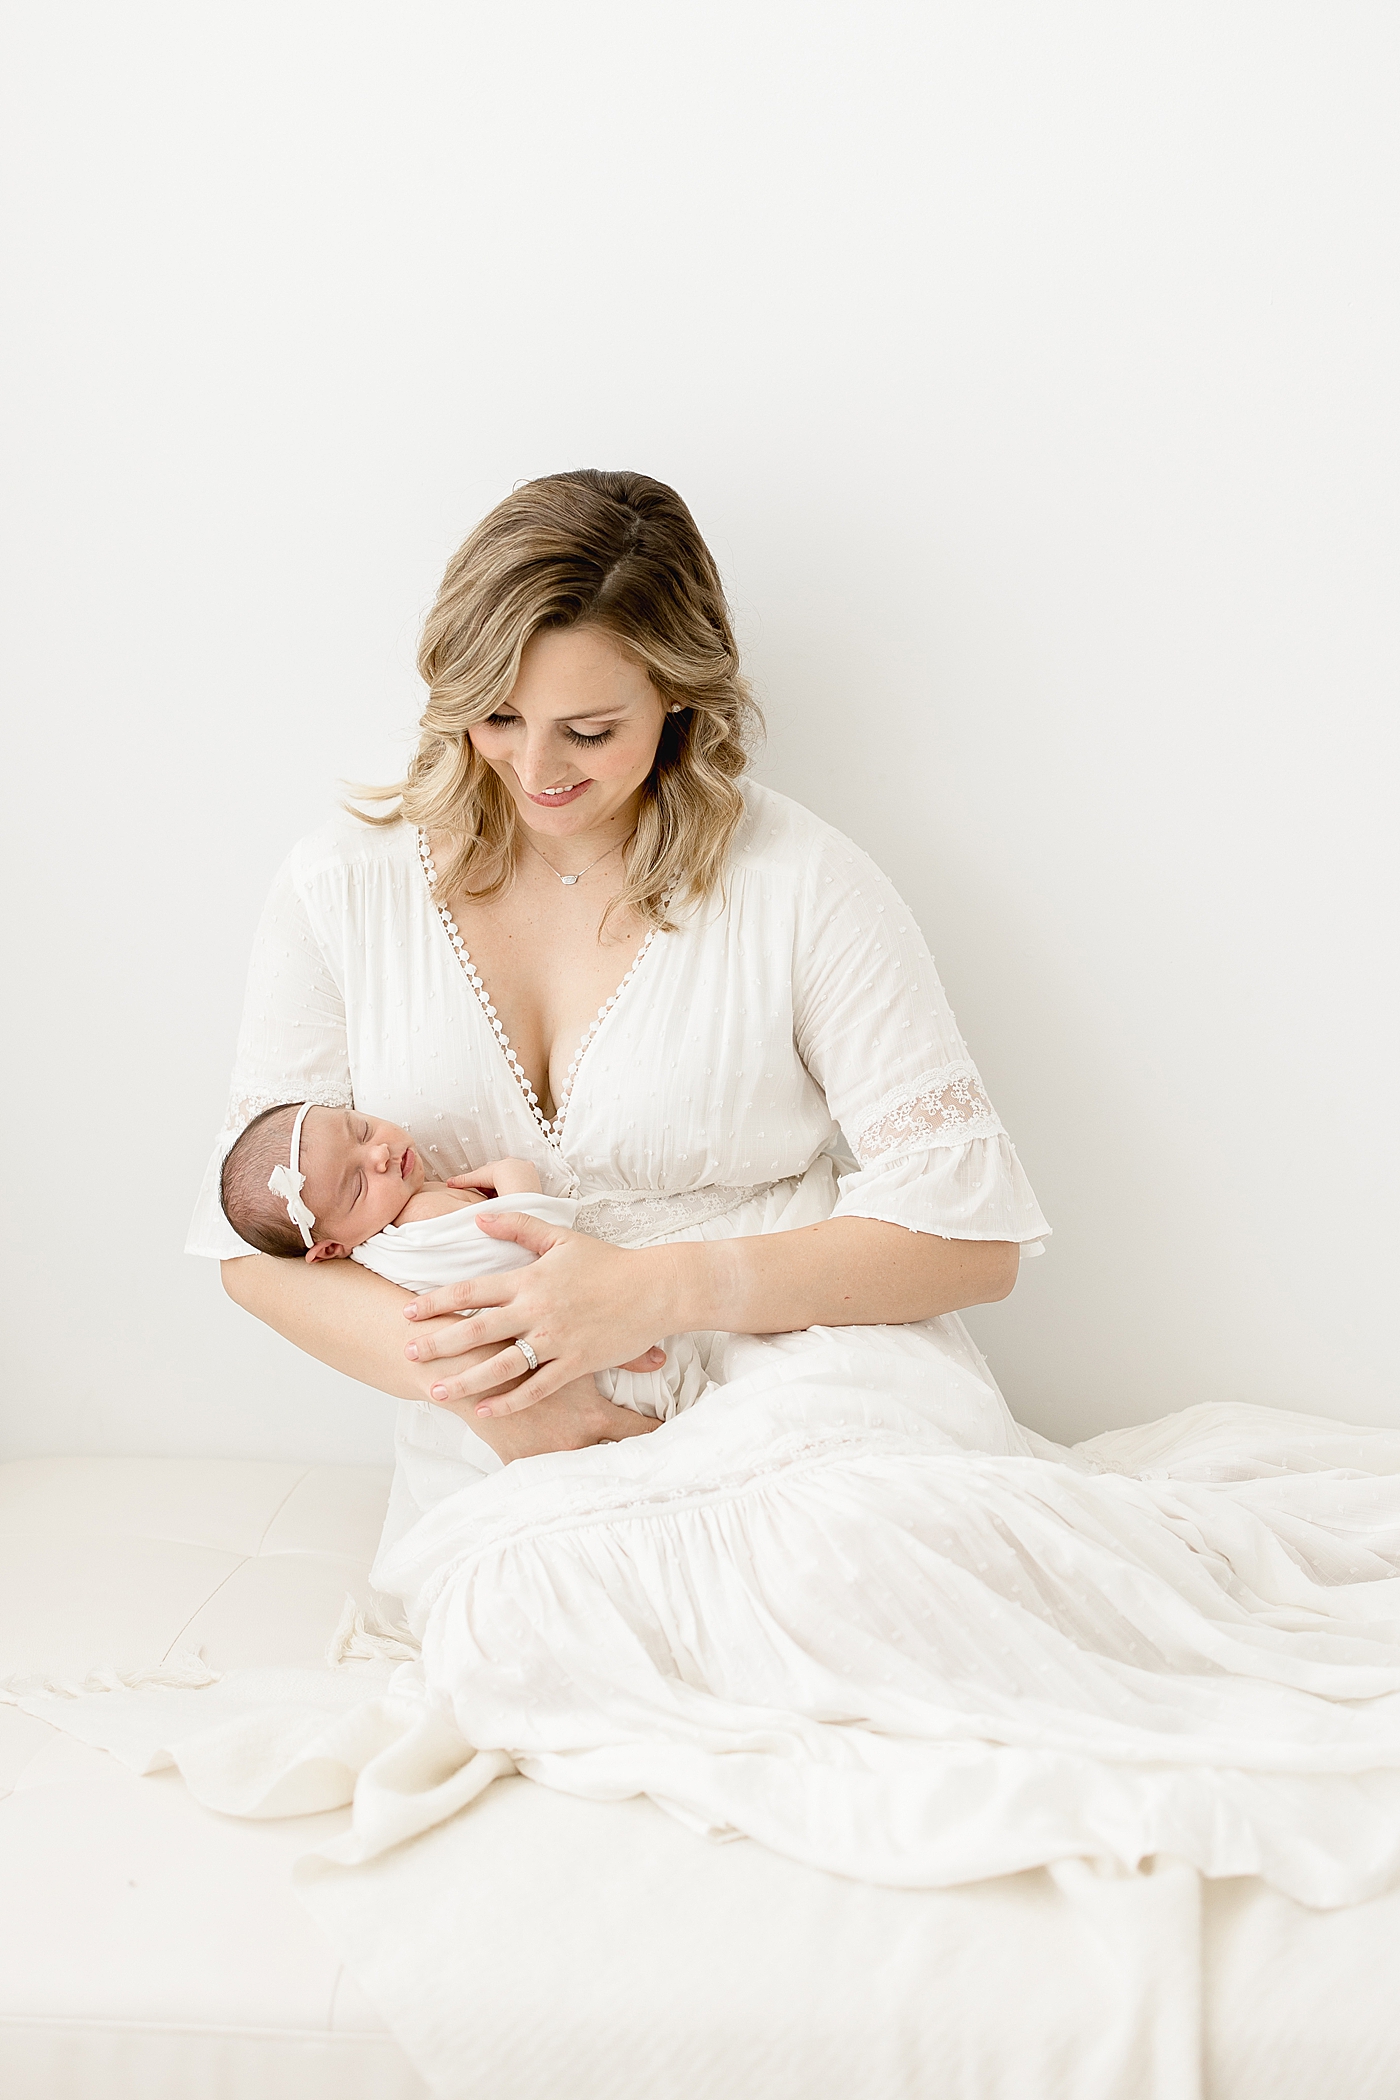 Mom with baby girl. Both are wearing white. Photo by Brittany Elise Photography.